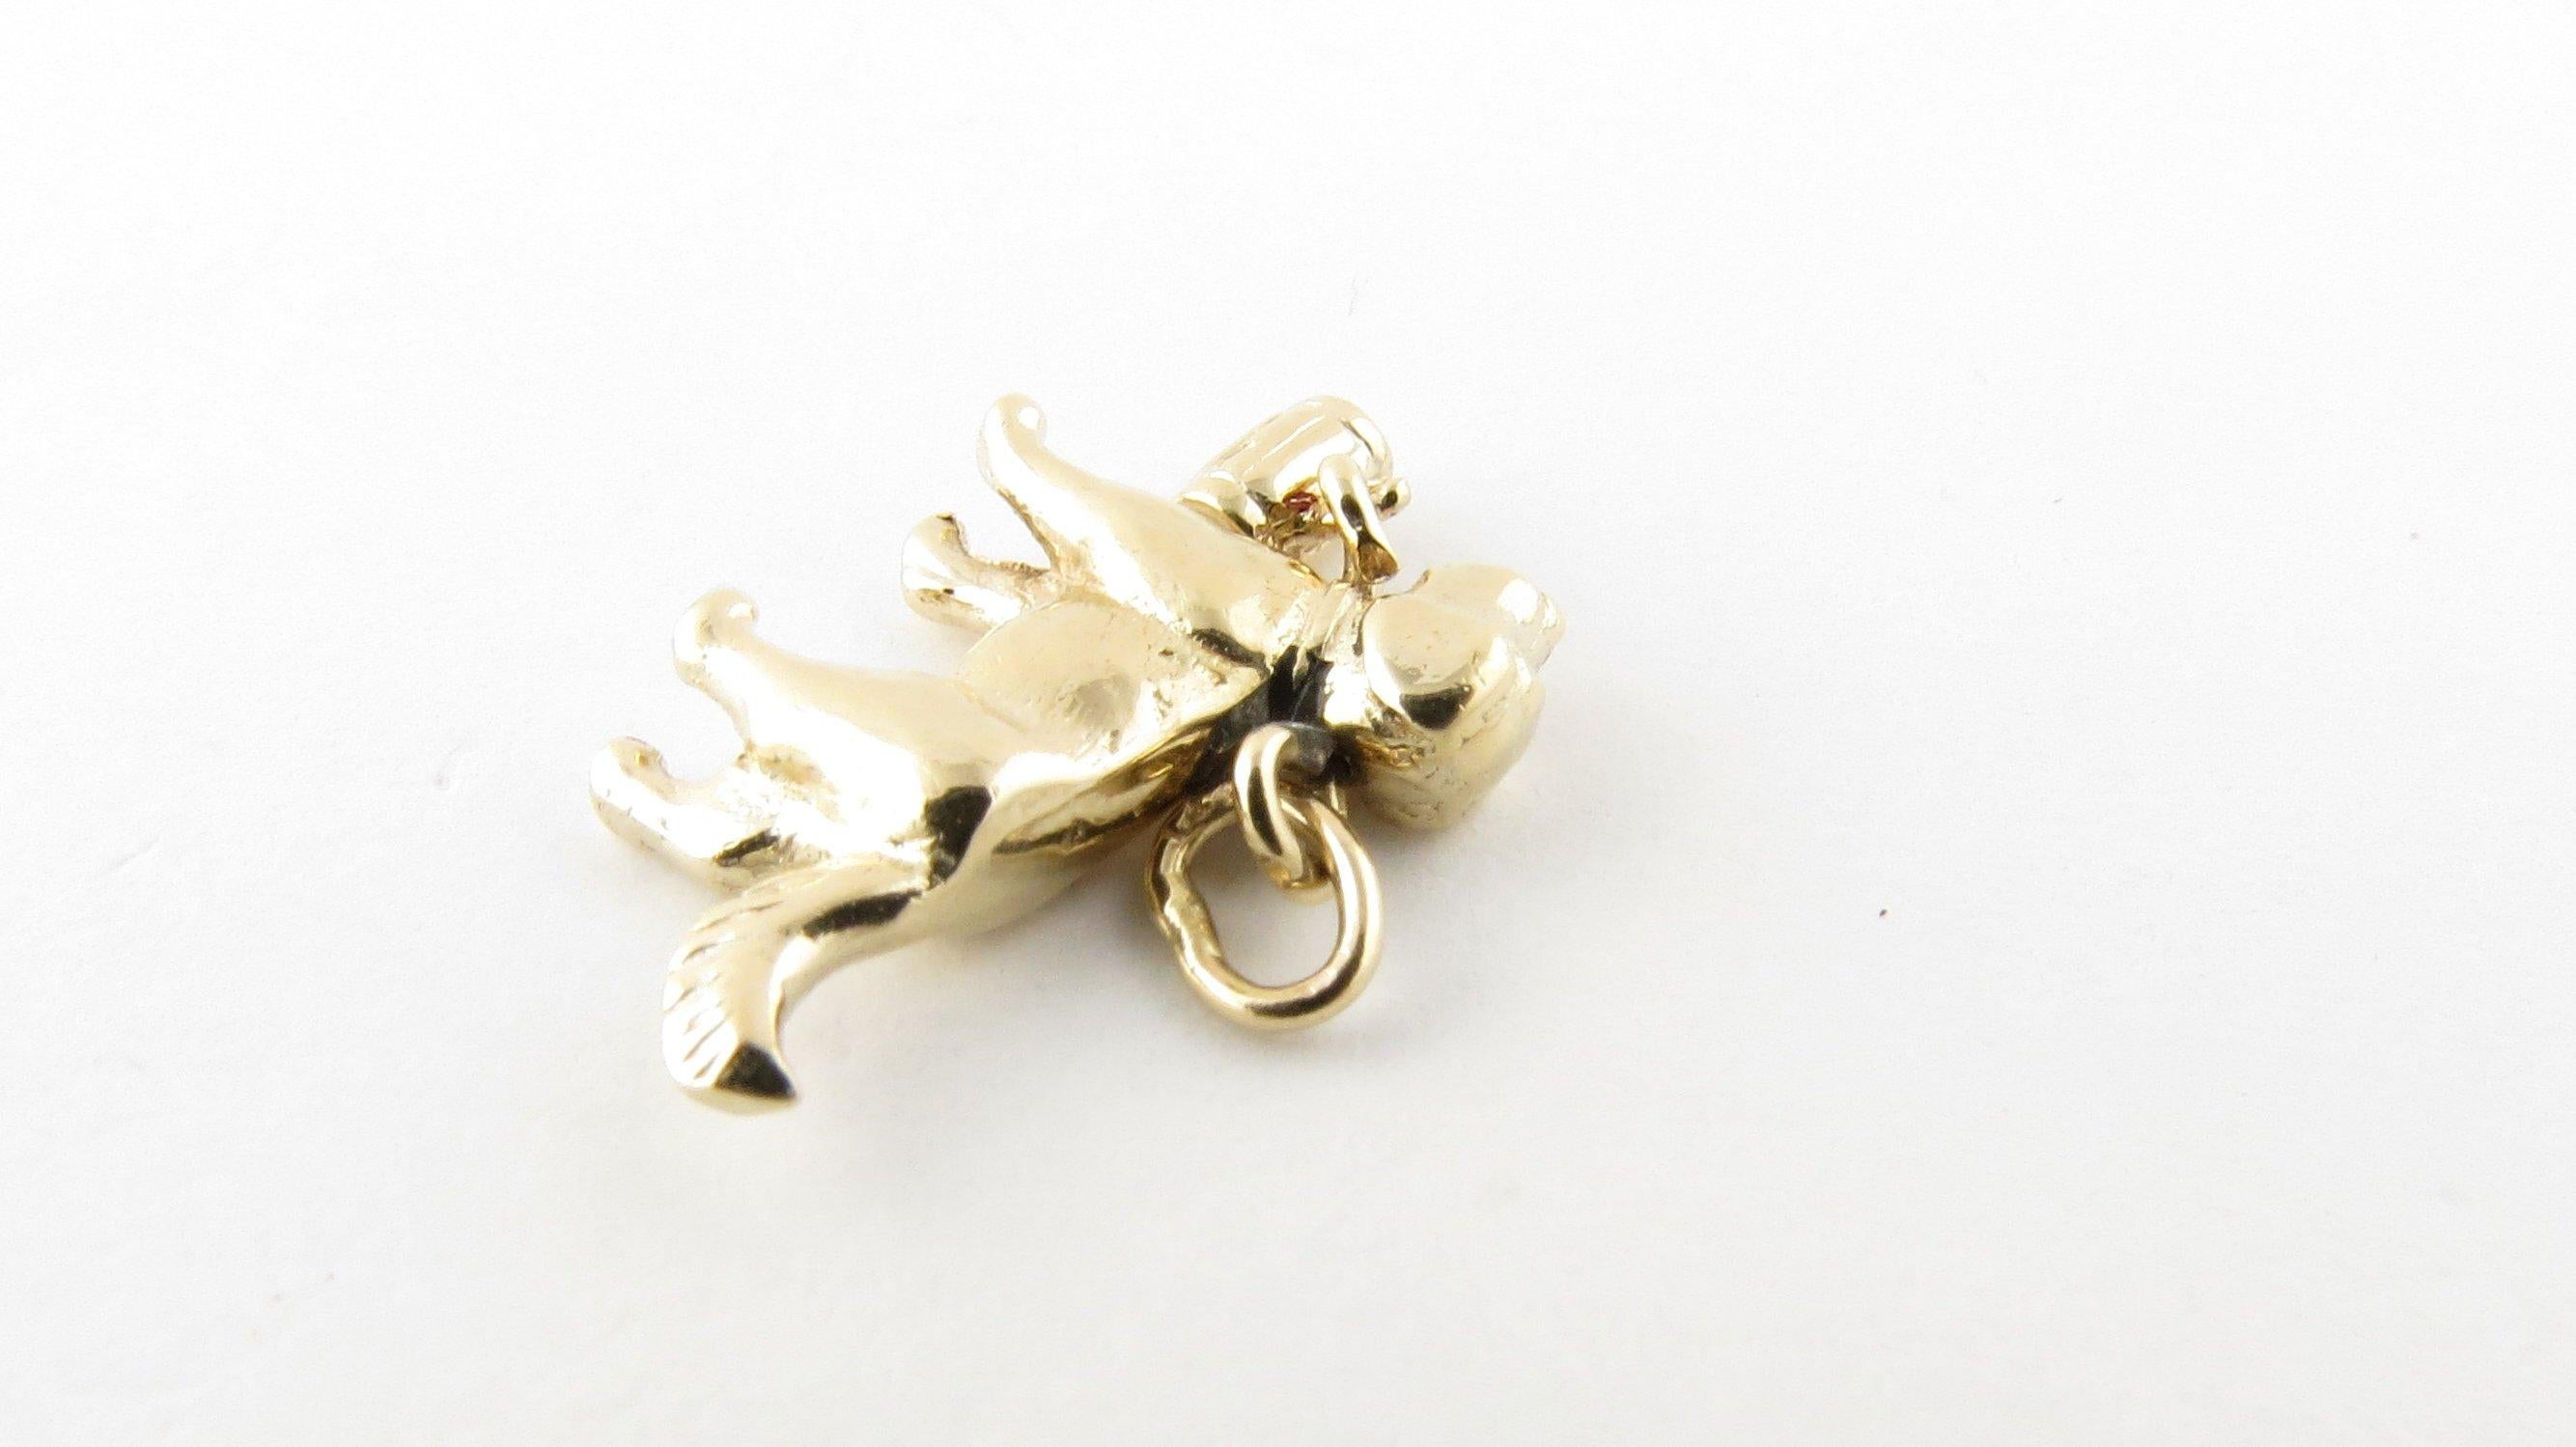 Vintage 14 Karat Yellow Gold St. Bernard Dog Charm- This lovely 3D charm features a miniature St. Bernard complete with dangling keg around his neck! Size: 14 mm x 17 mm (actual charm) Weight: 1.6 dwt. / 2.6 gr. Stamped: 14K Very good condition,